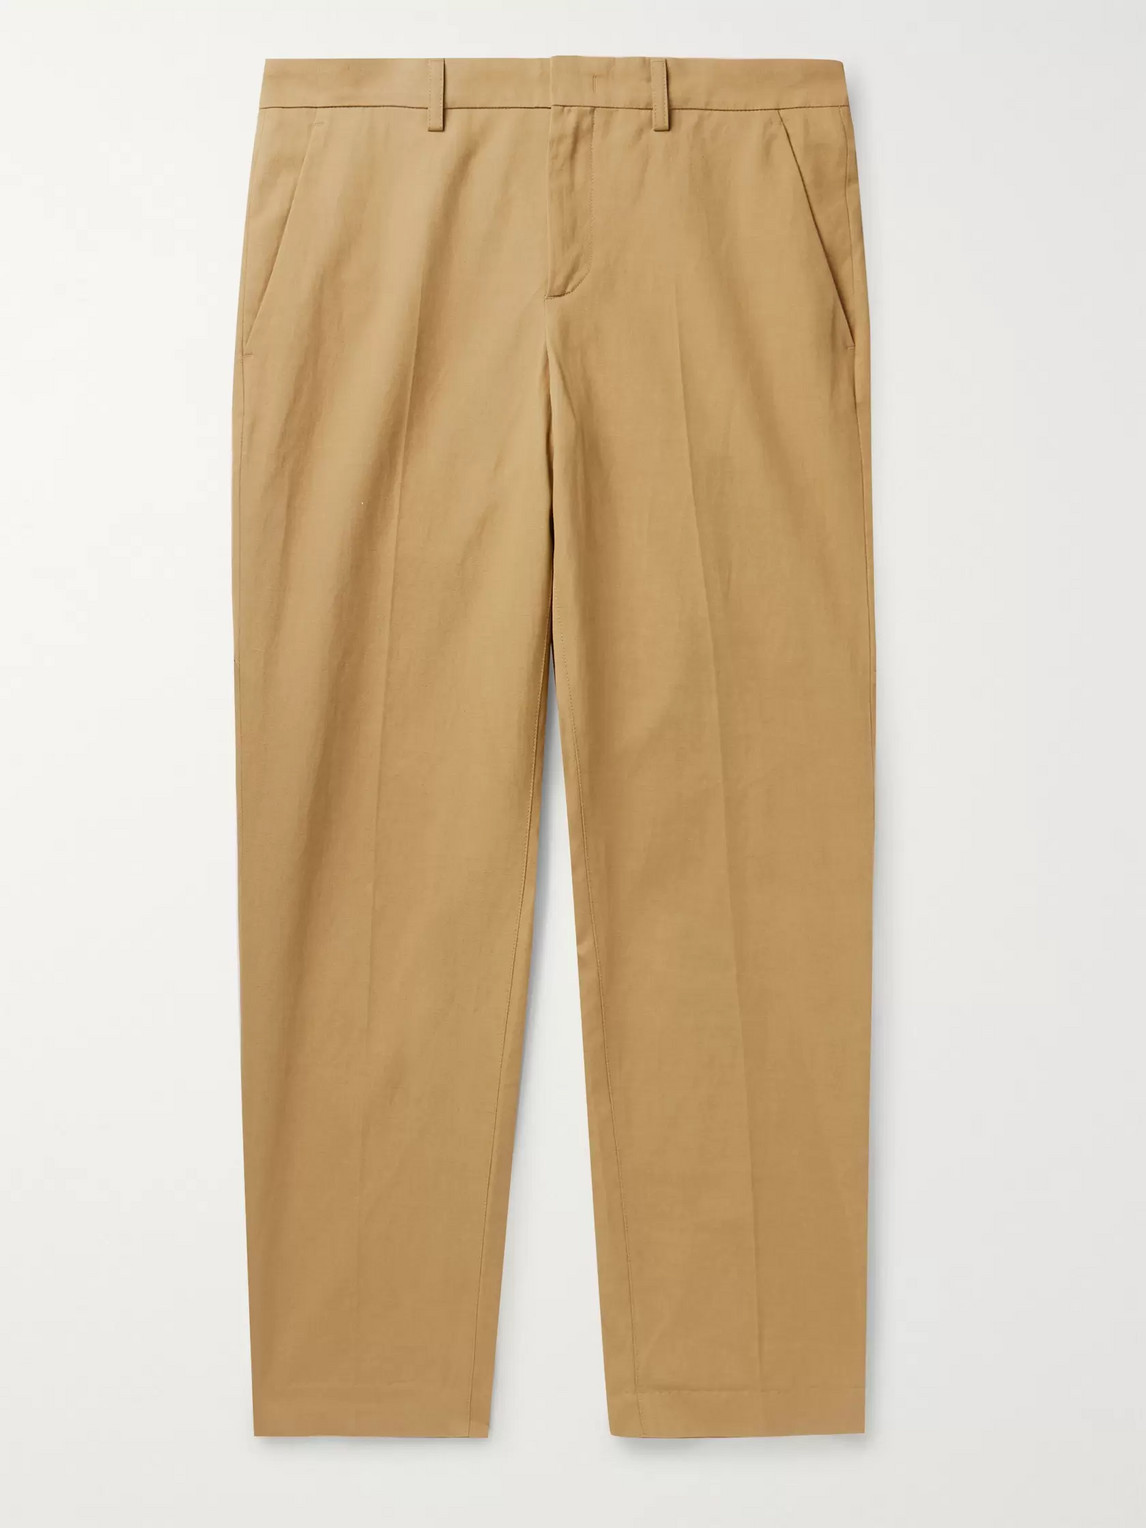 A.P.C. RAPHAEL SLIM-FIT COTTON AND LINEN-BLEND TWILL CHINOS